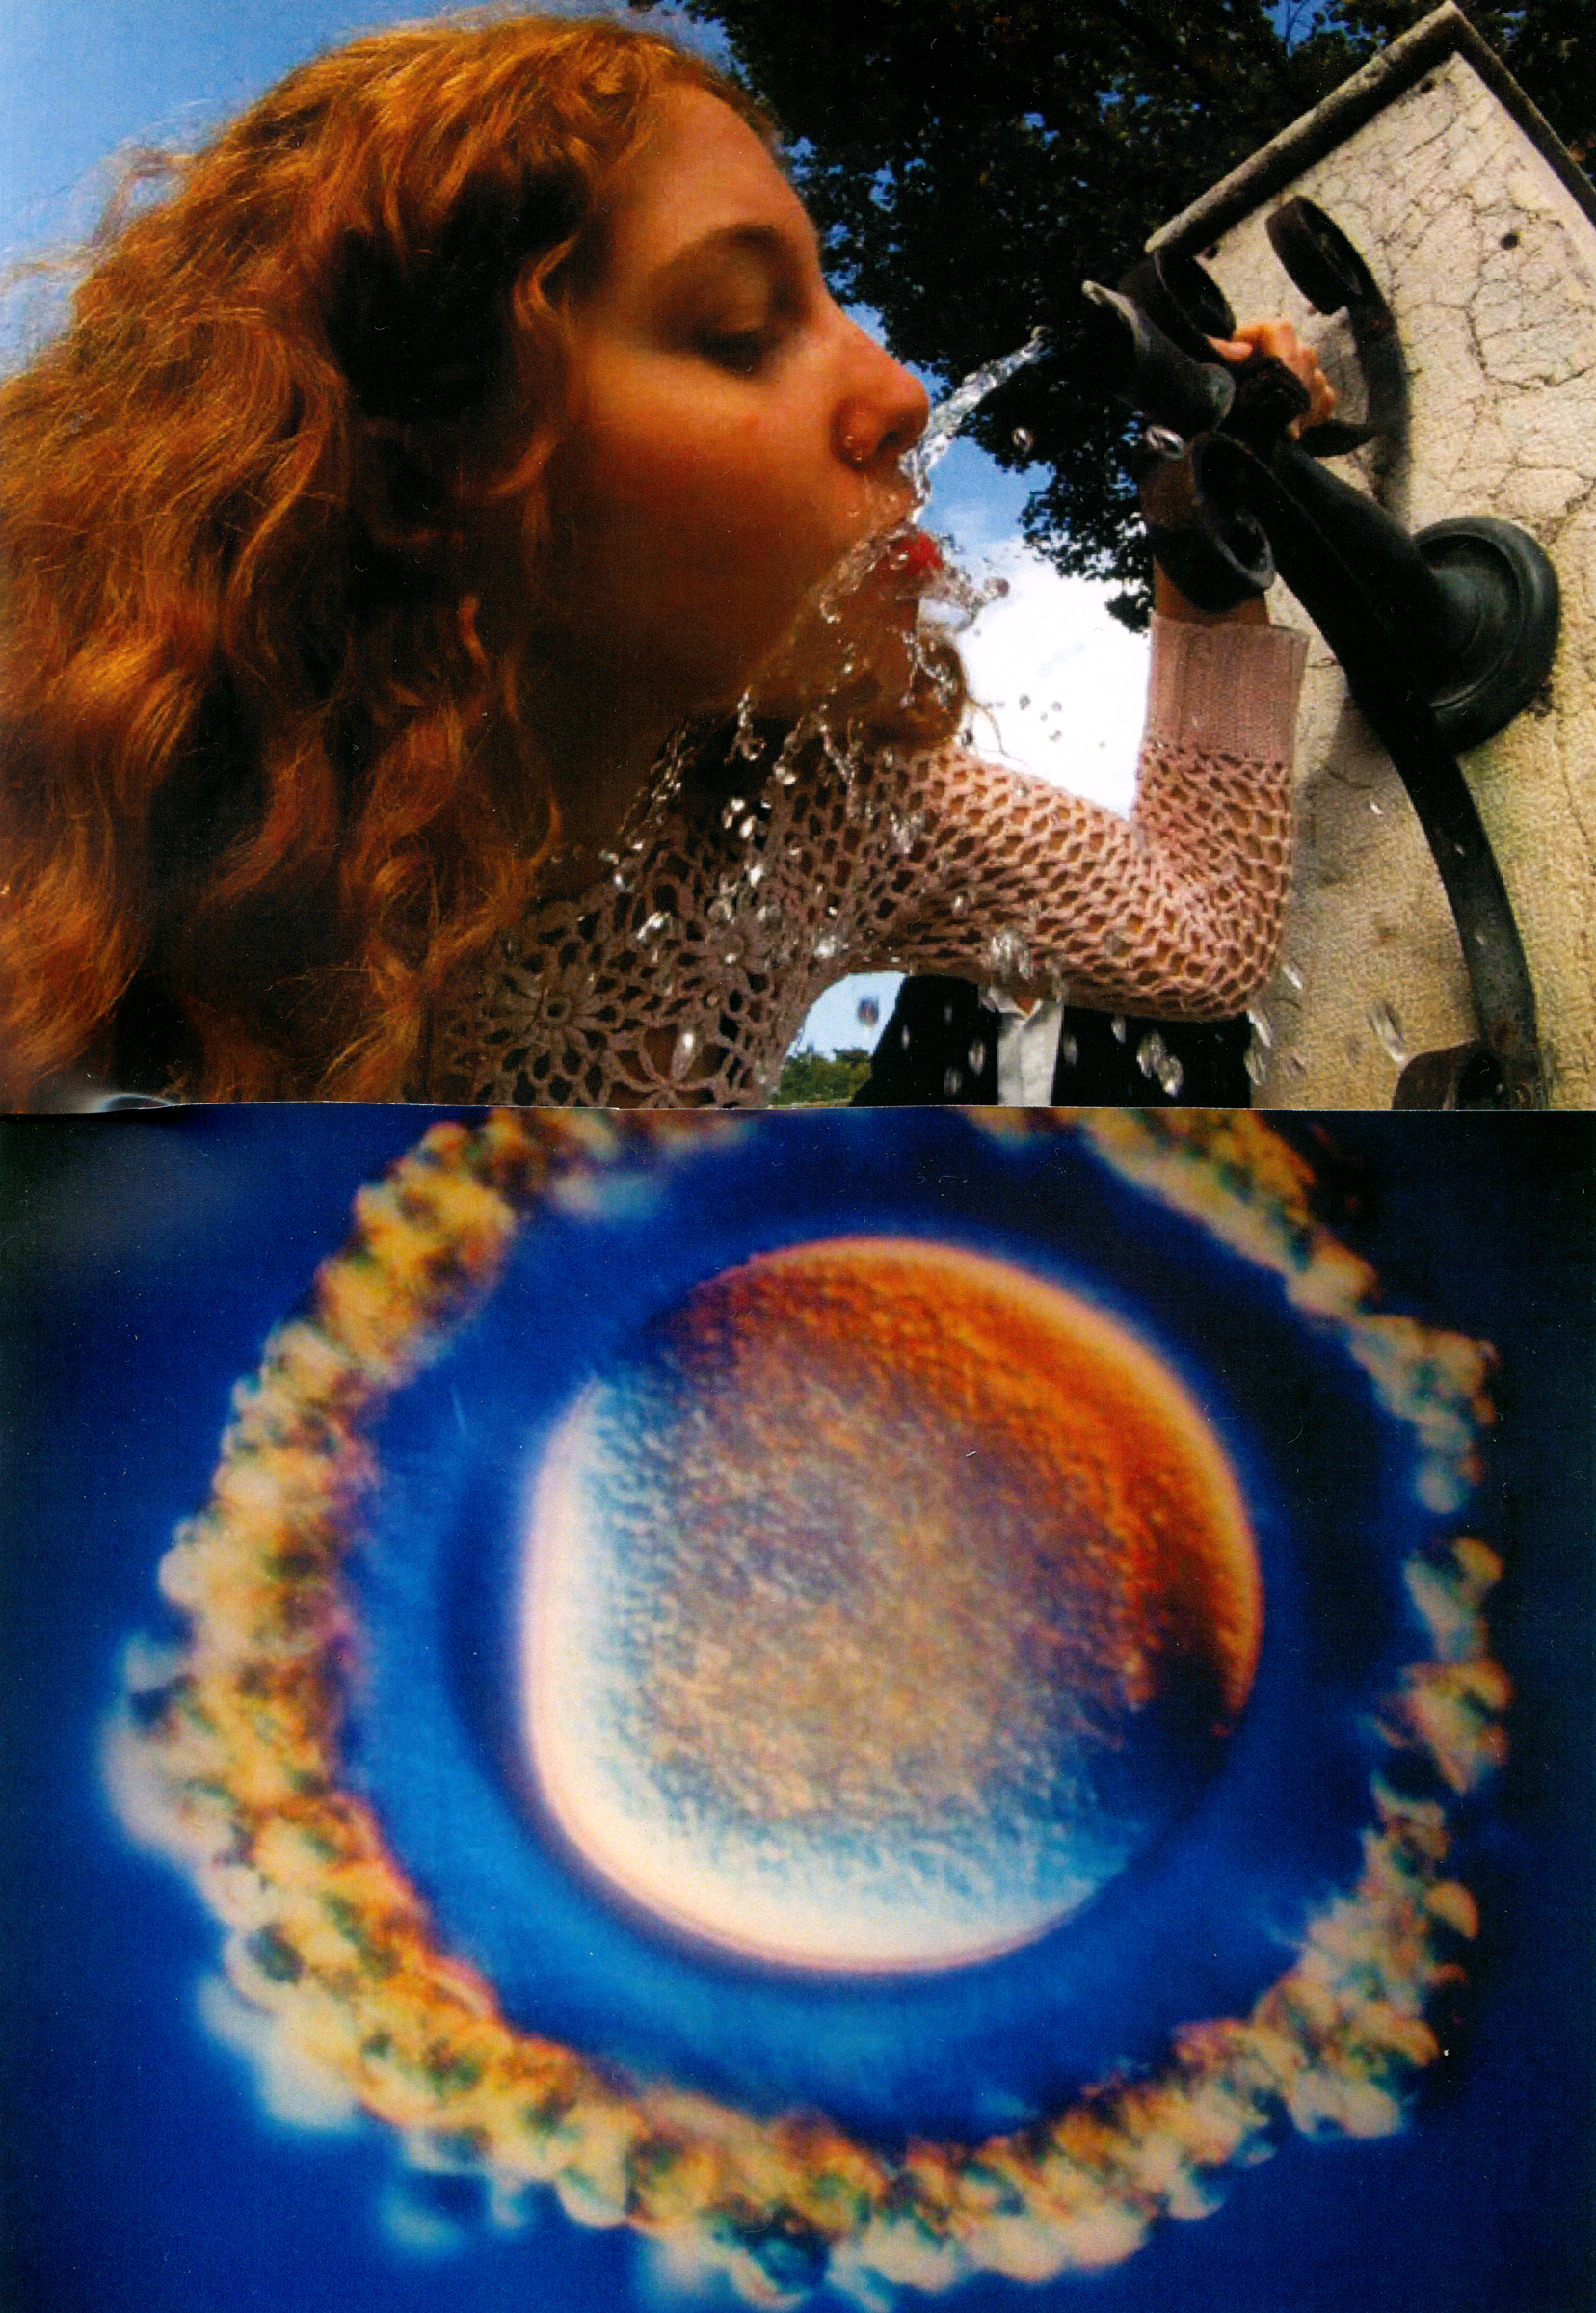 Poster: a collage in two parts showing a redhead woman drinking from a tap and an egg cell